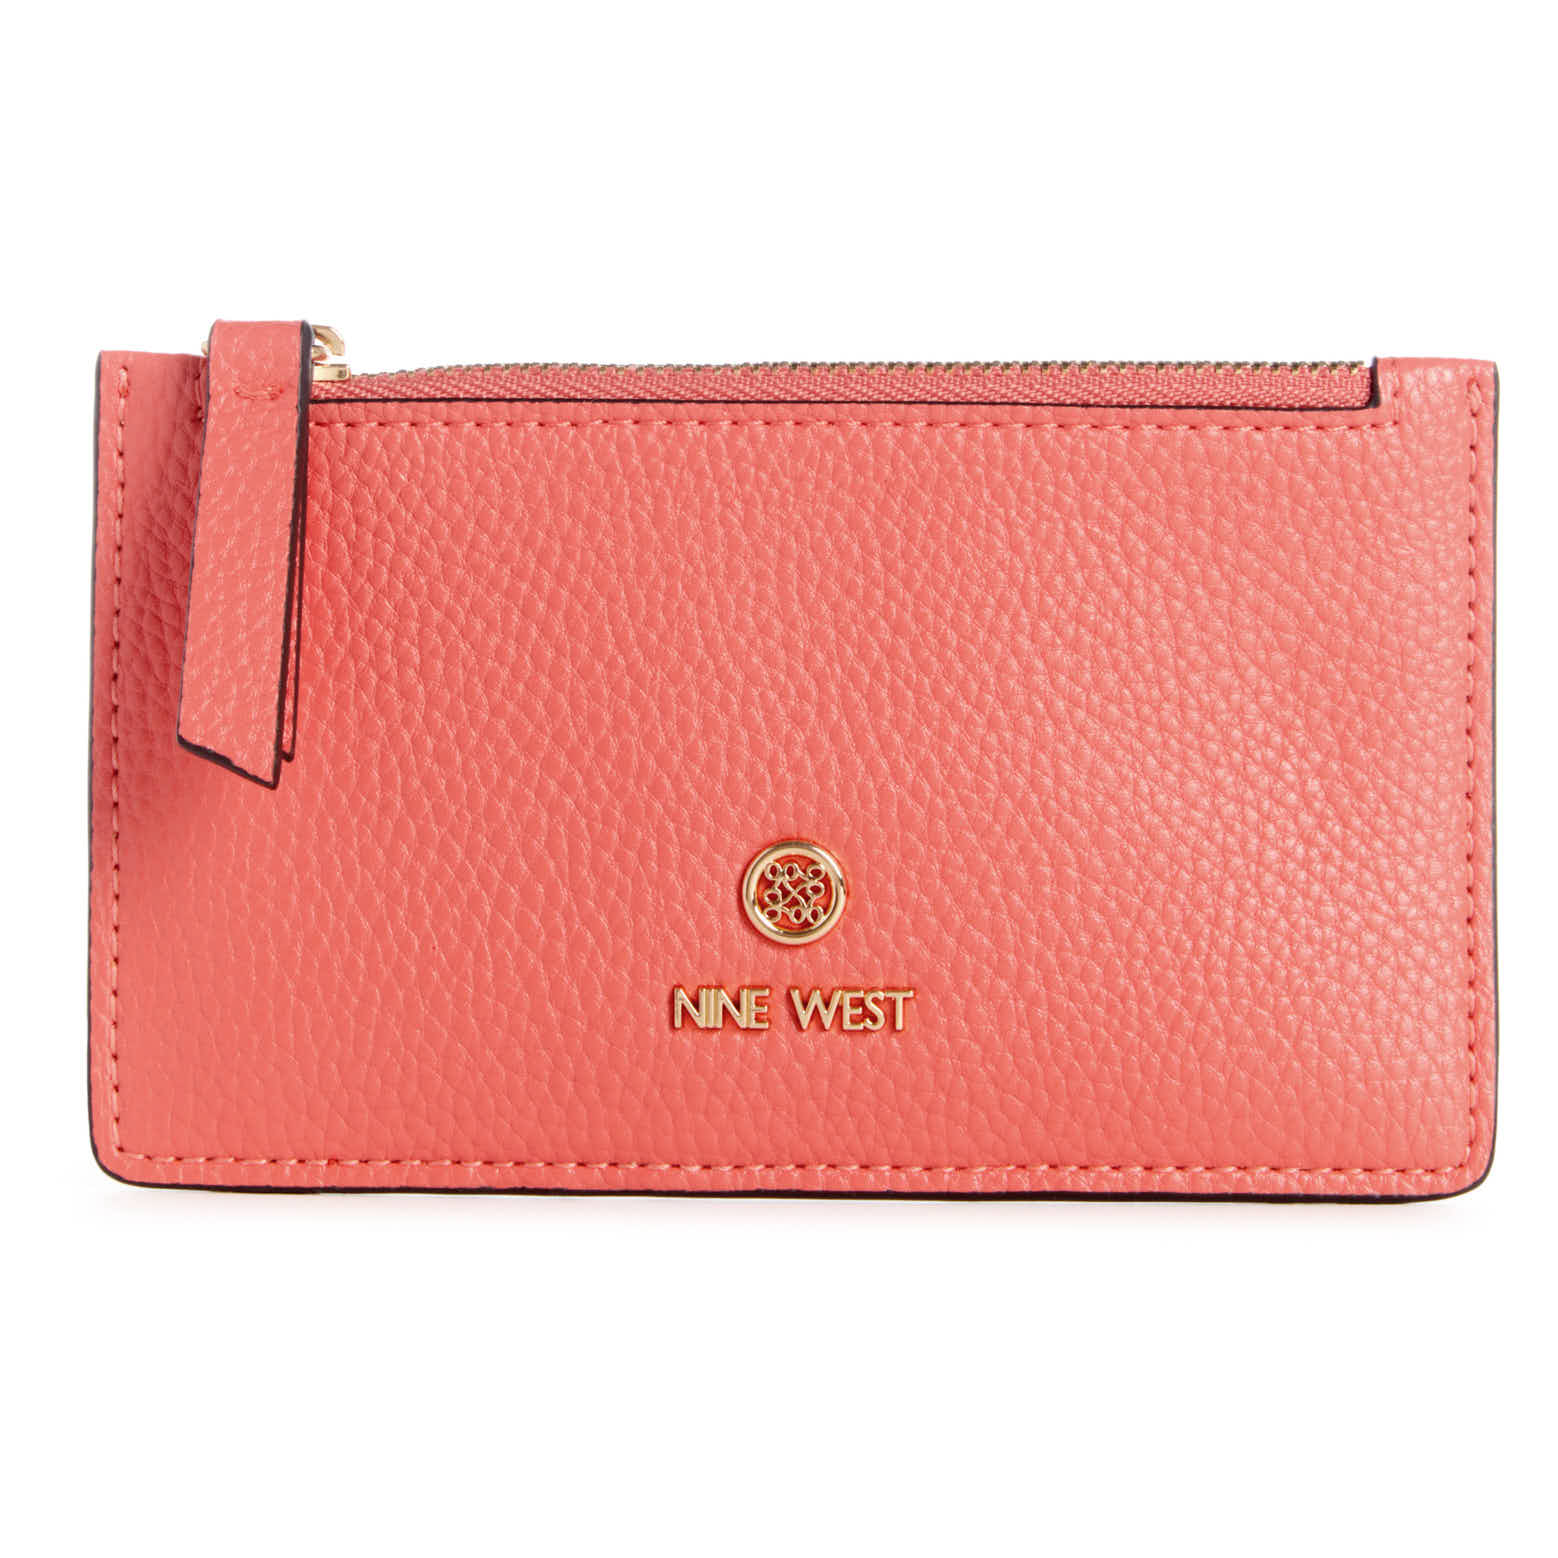 Nine West Crossbody Bag for Women - Caramel : Buy Online at Best Price in  KSA - Souq is now Amazon.sa: Fashion